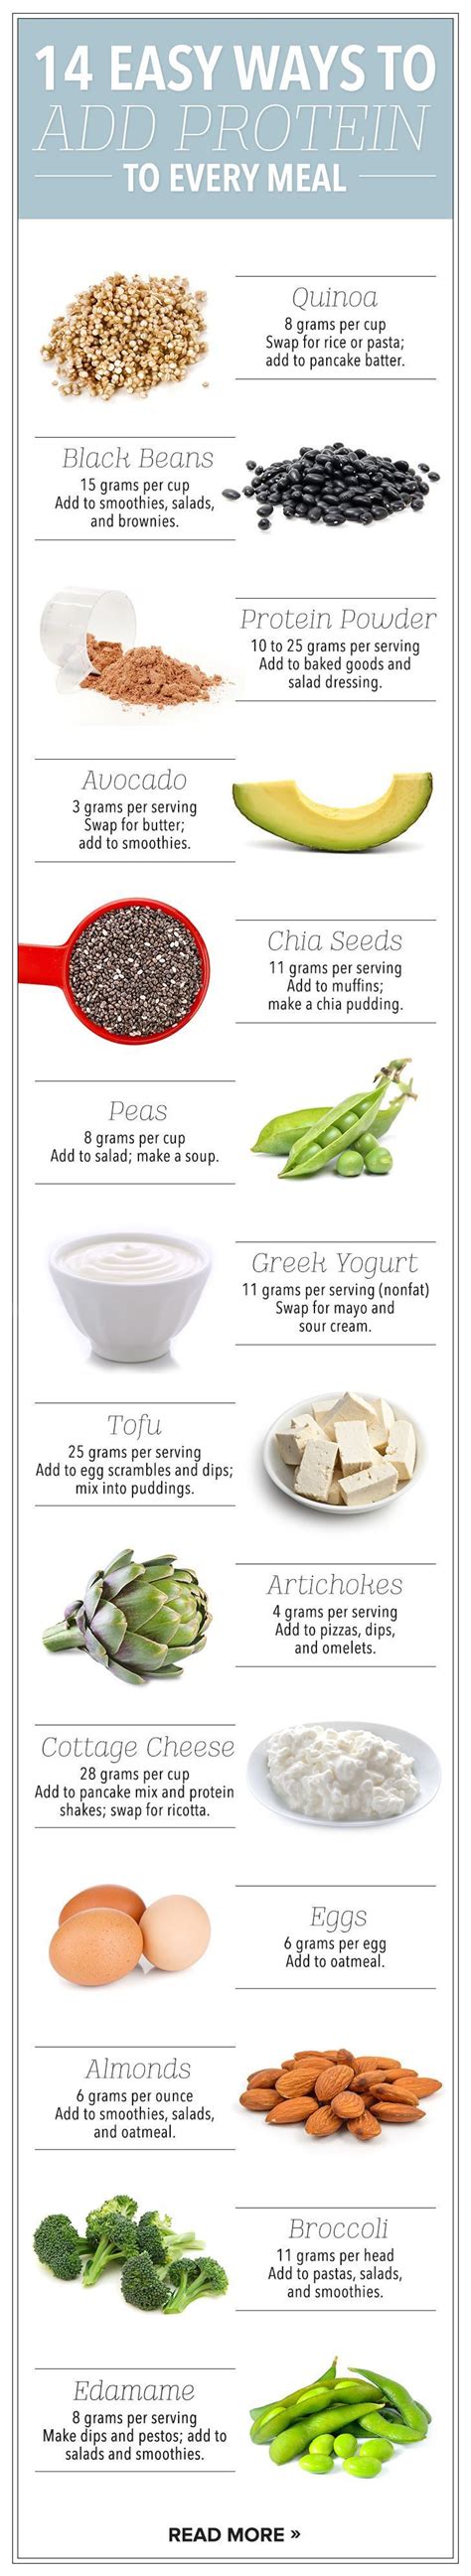 14 Easy Ways To Add Protein To Every Meal Infographic Scheduled Via